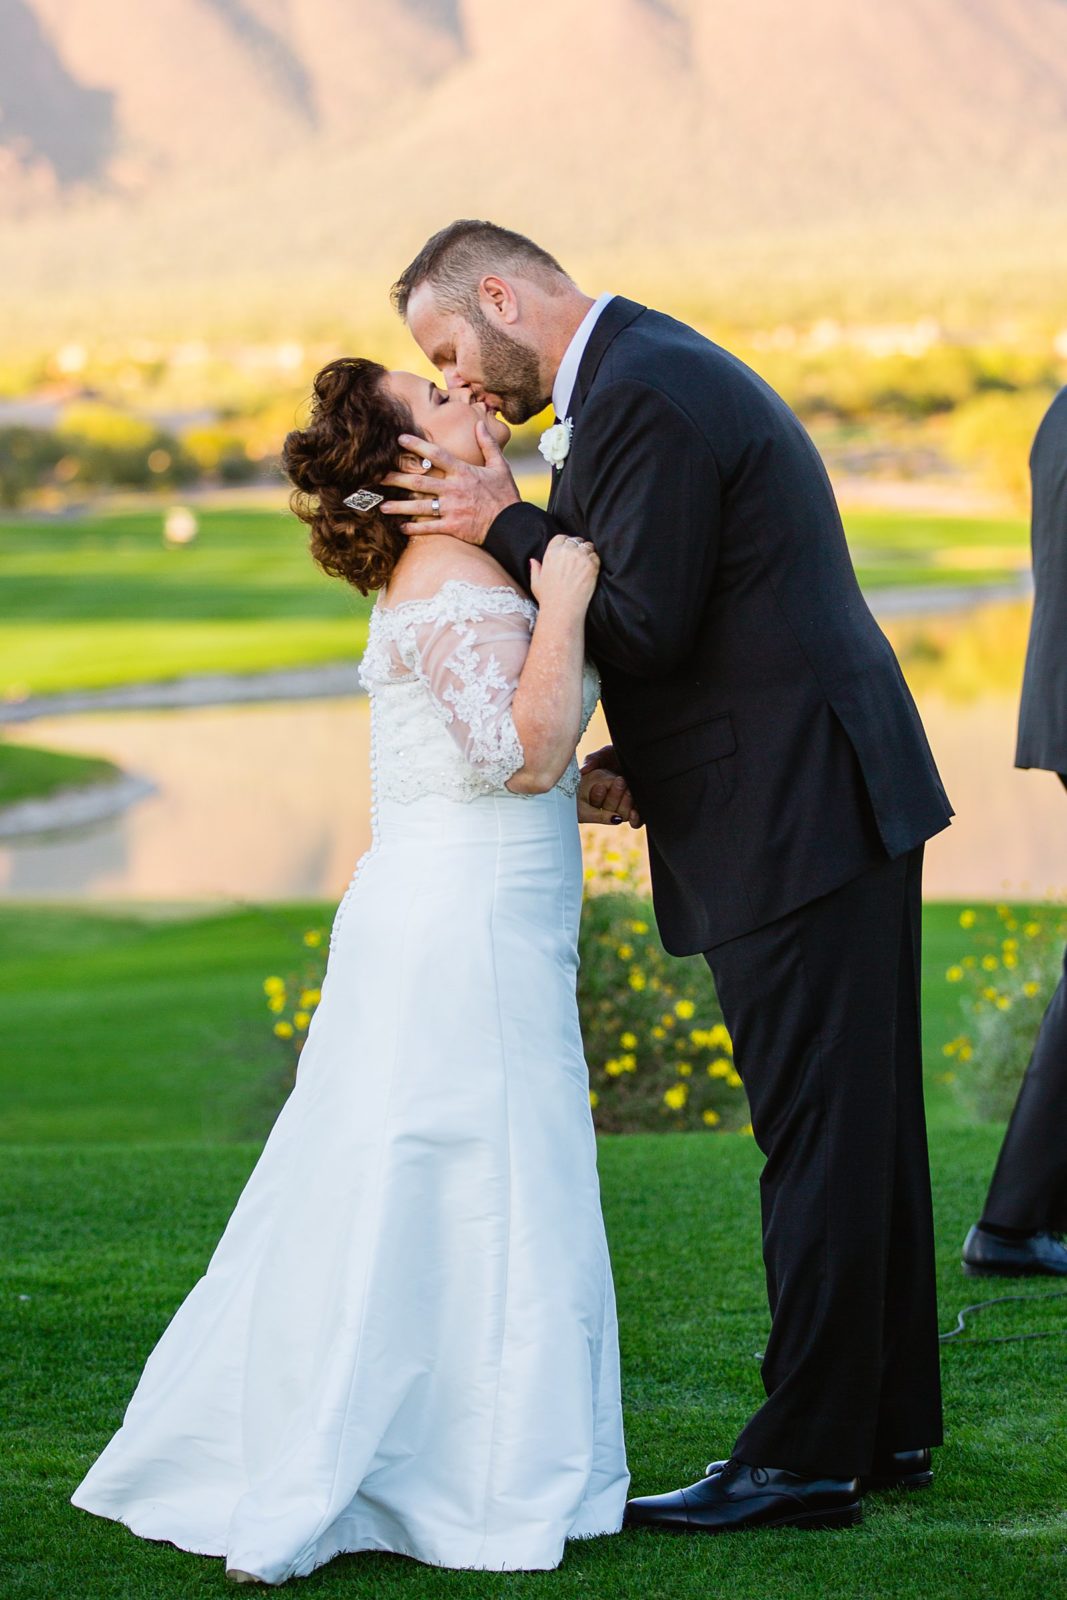 Bride and groom share their first kiss during their wedding ceremony at Superstition Mountain Clubhouse by Arizona wedding photographer PMA Photography.